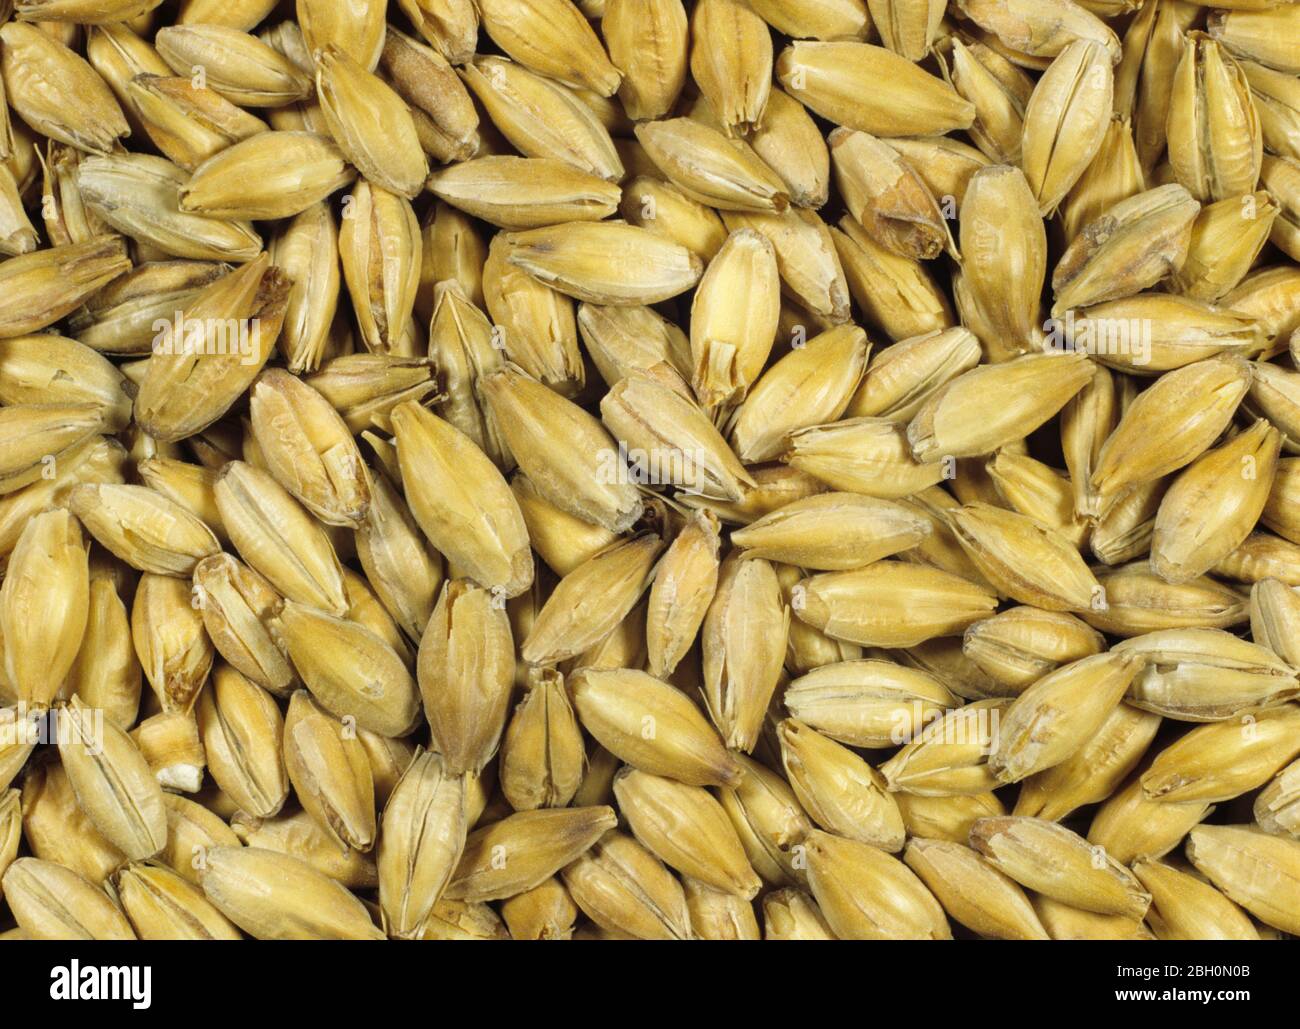 Process of malting barley seed to produce malt stage 7.  Barley seed  fin ished malt after chitting and kilning Stock Photo